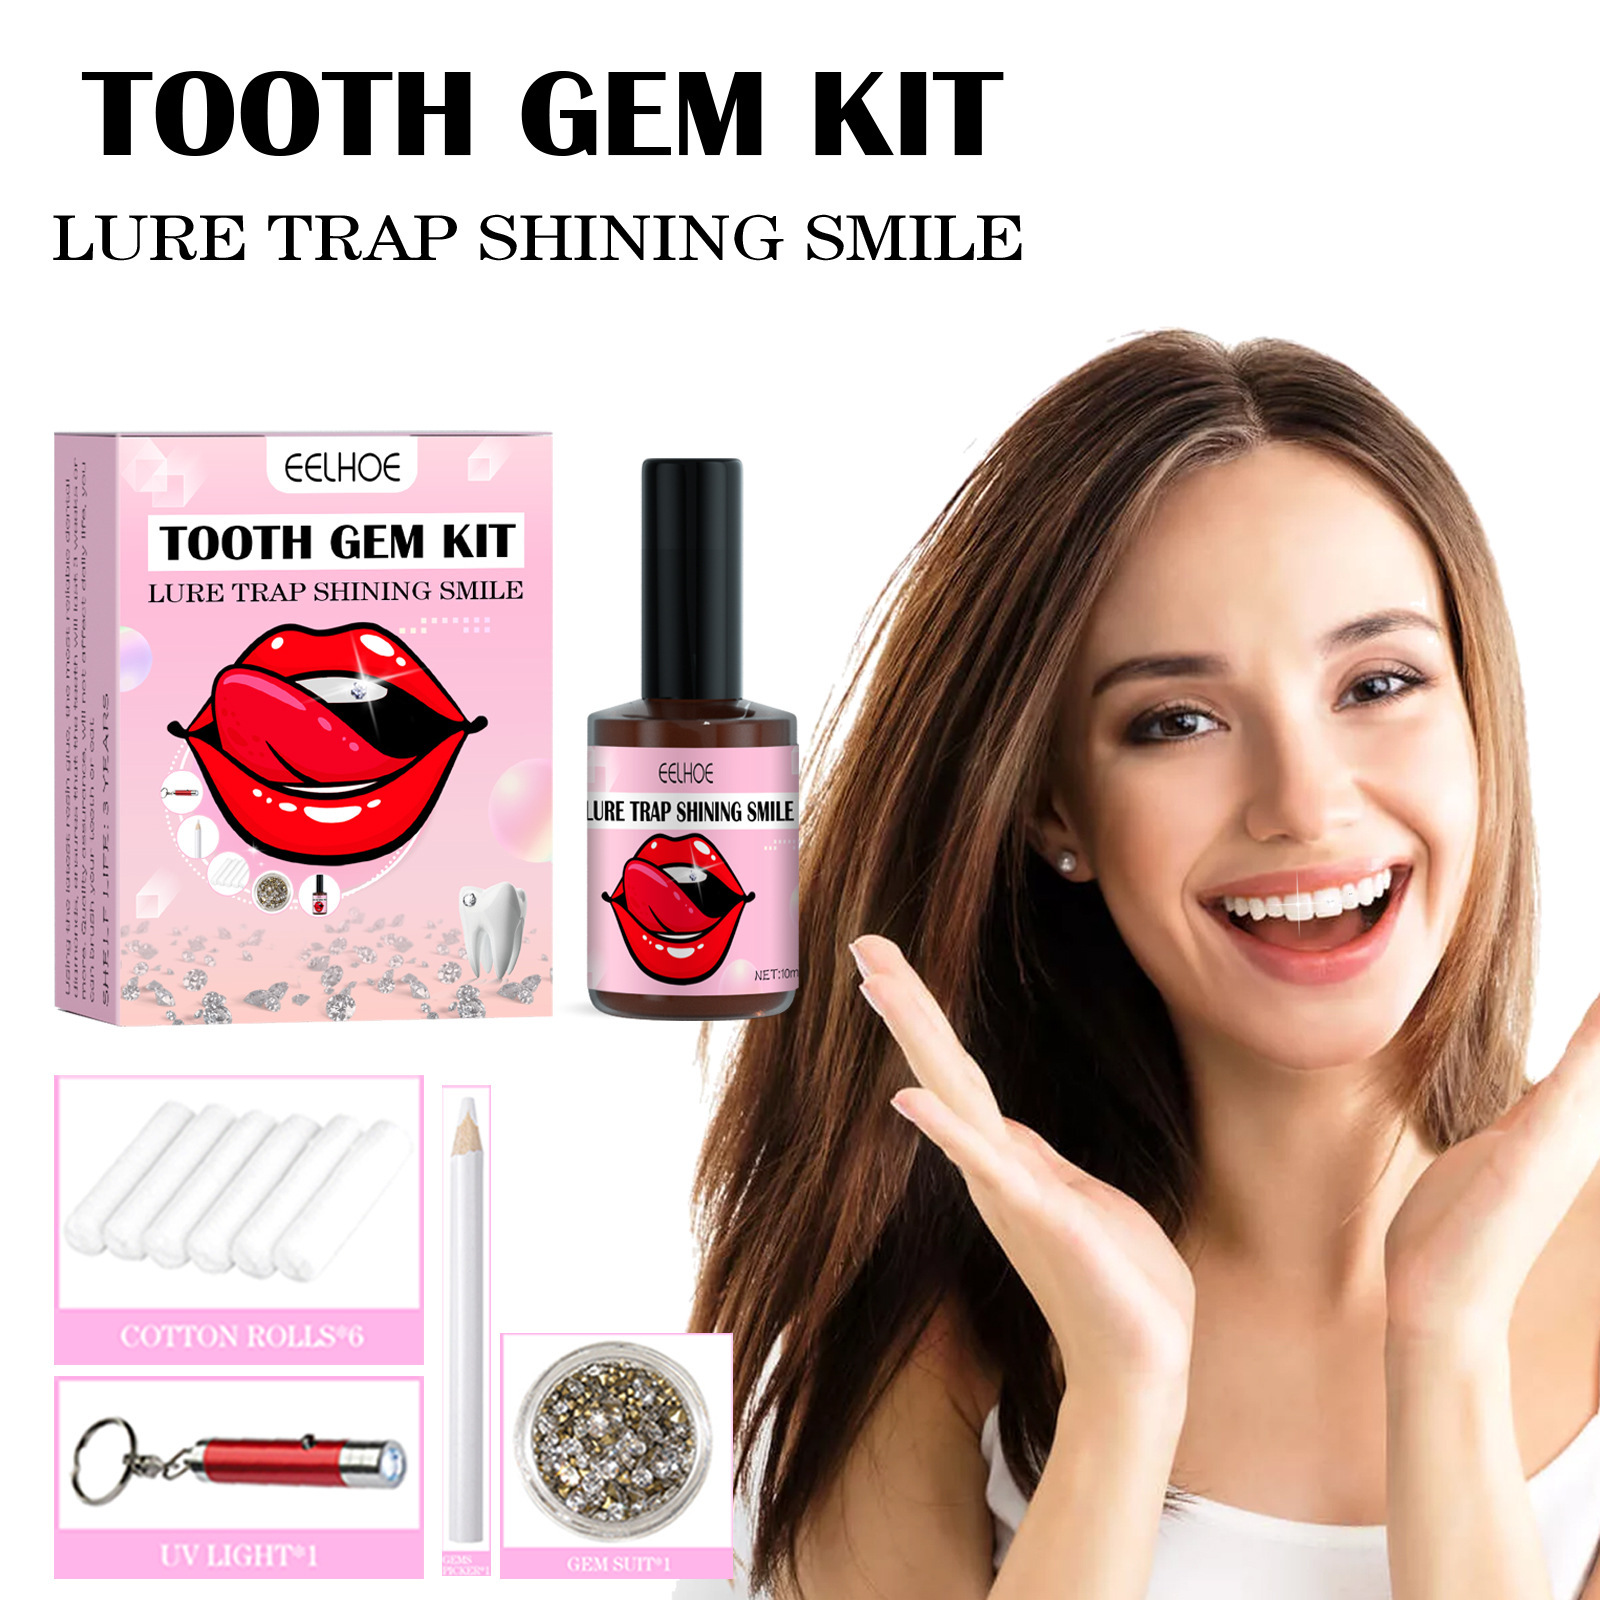 Get a Dazzling Smile with Our Tooth Gems Kit - Transform Your Look Today!